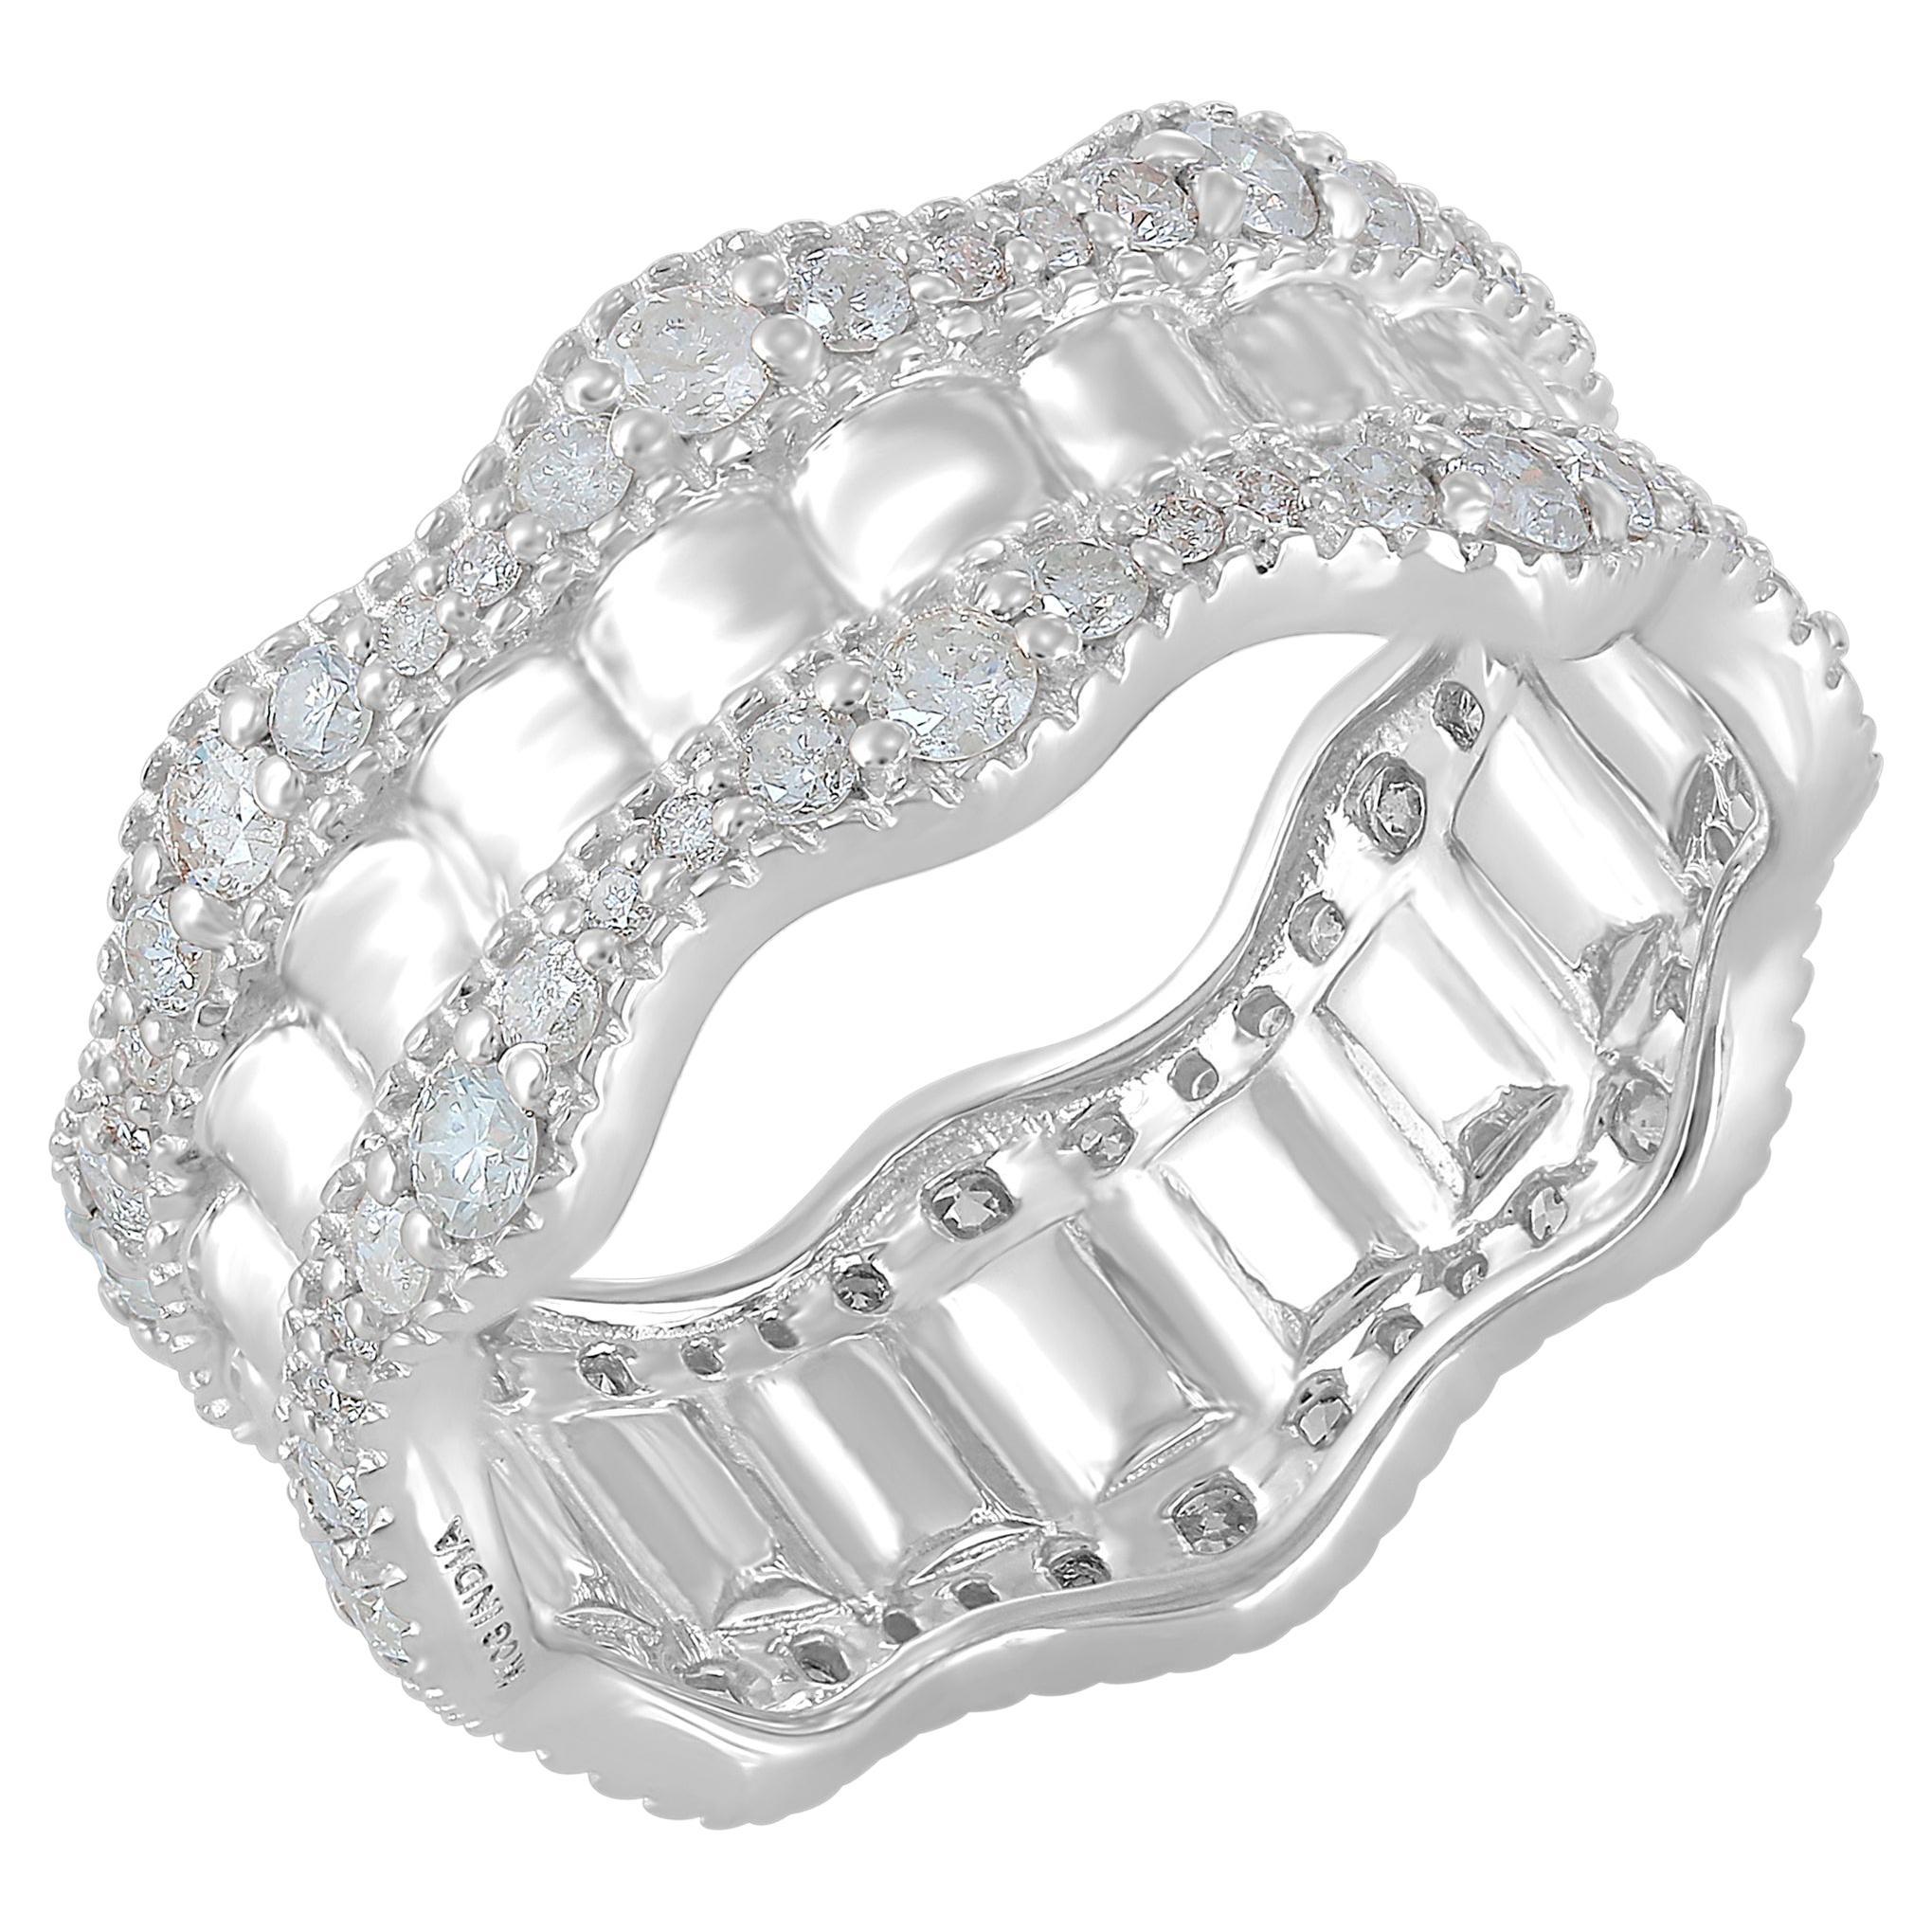 Gemisty 1.22cttw. Diamond Eternity Band Ring in 925 Sterling Silver For Sale